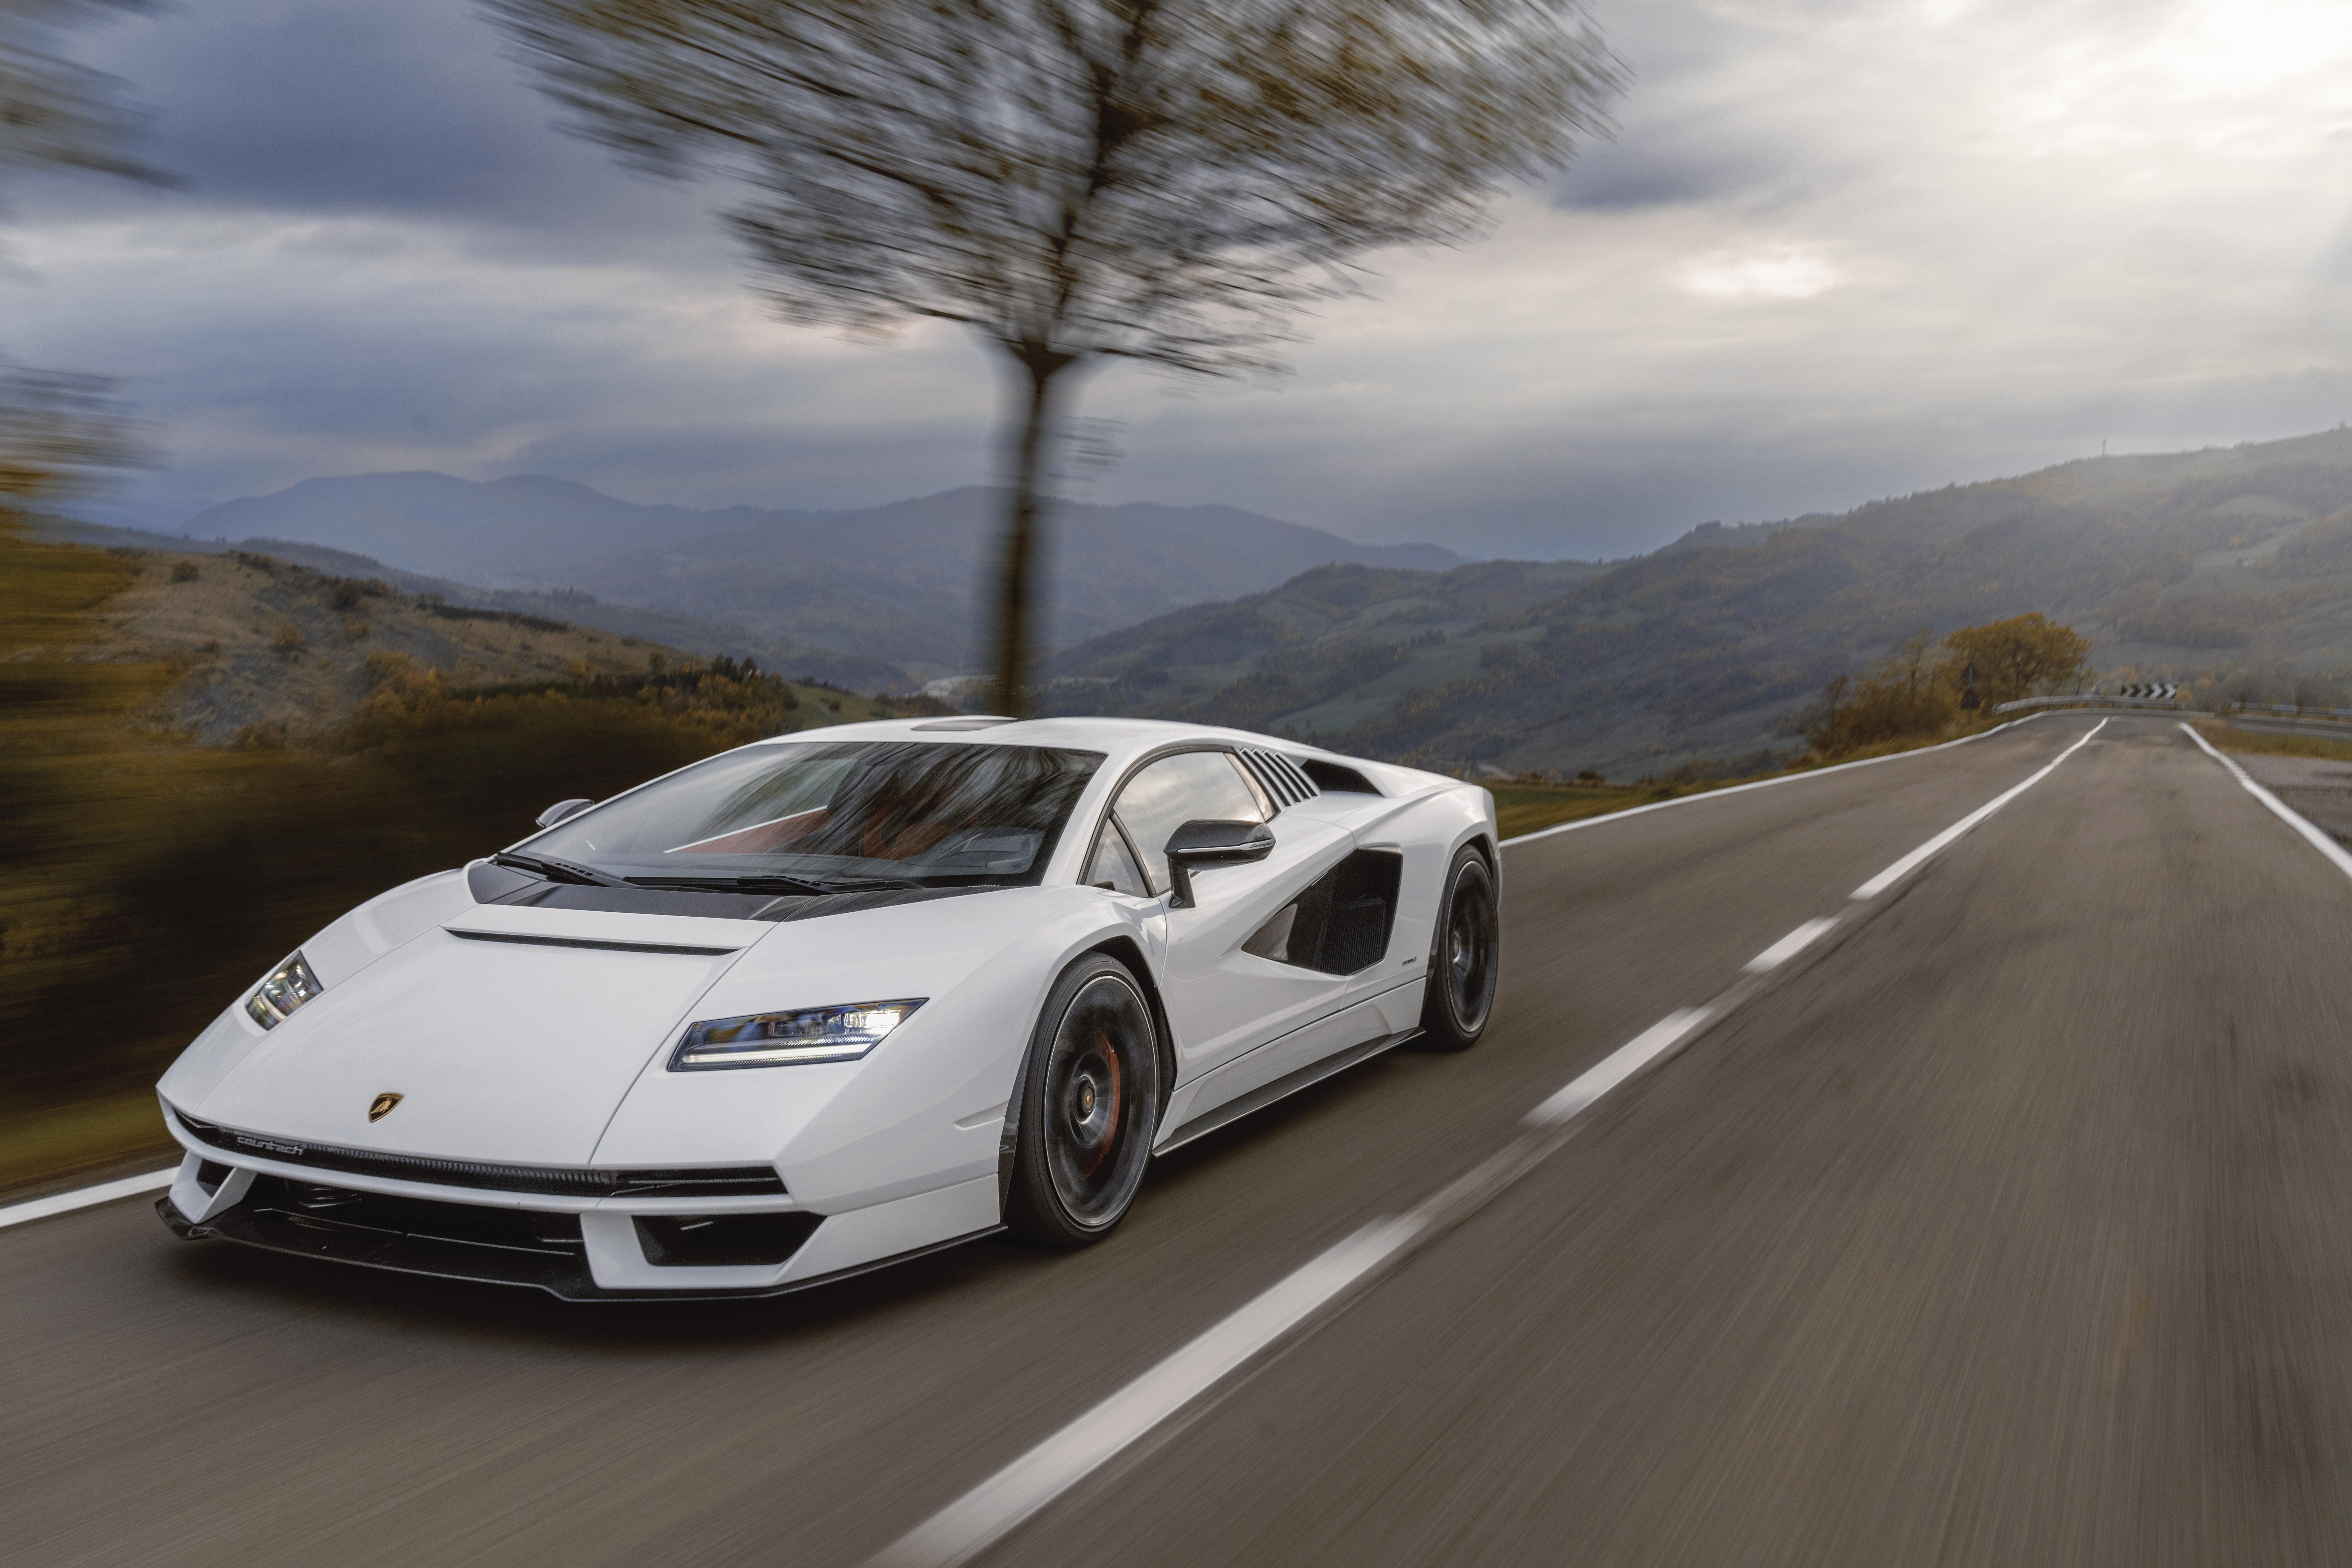 The new Lamborghini Countach LPI 800-4 speeds up on the road. 